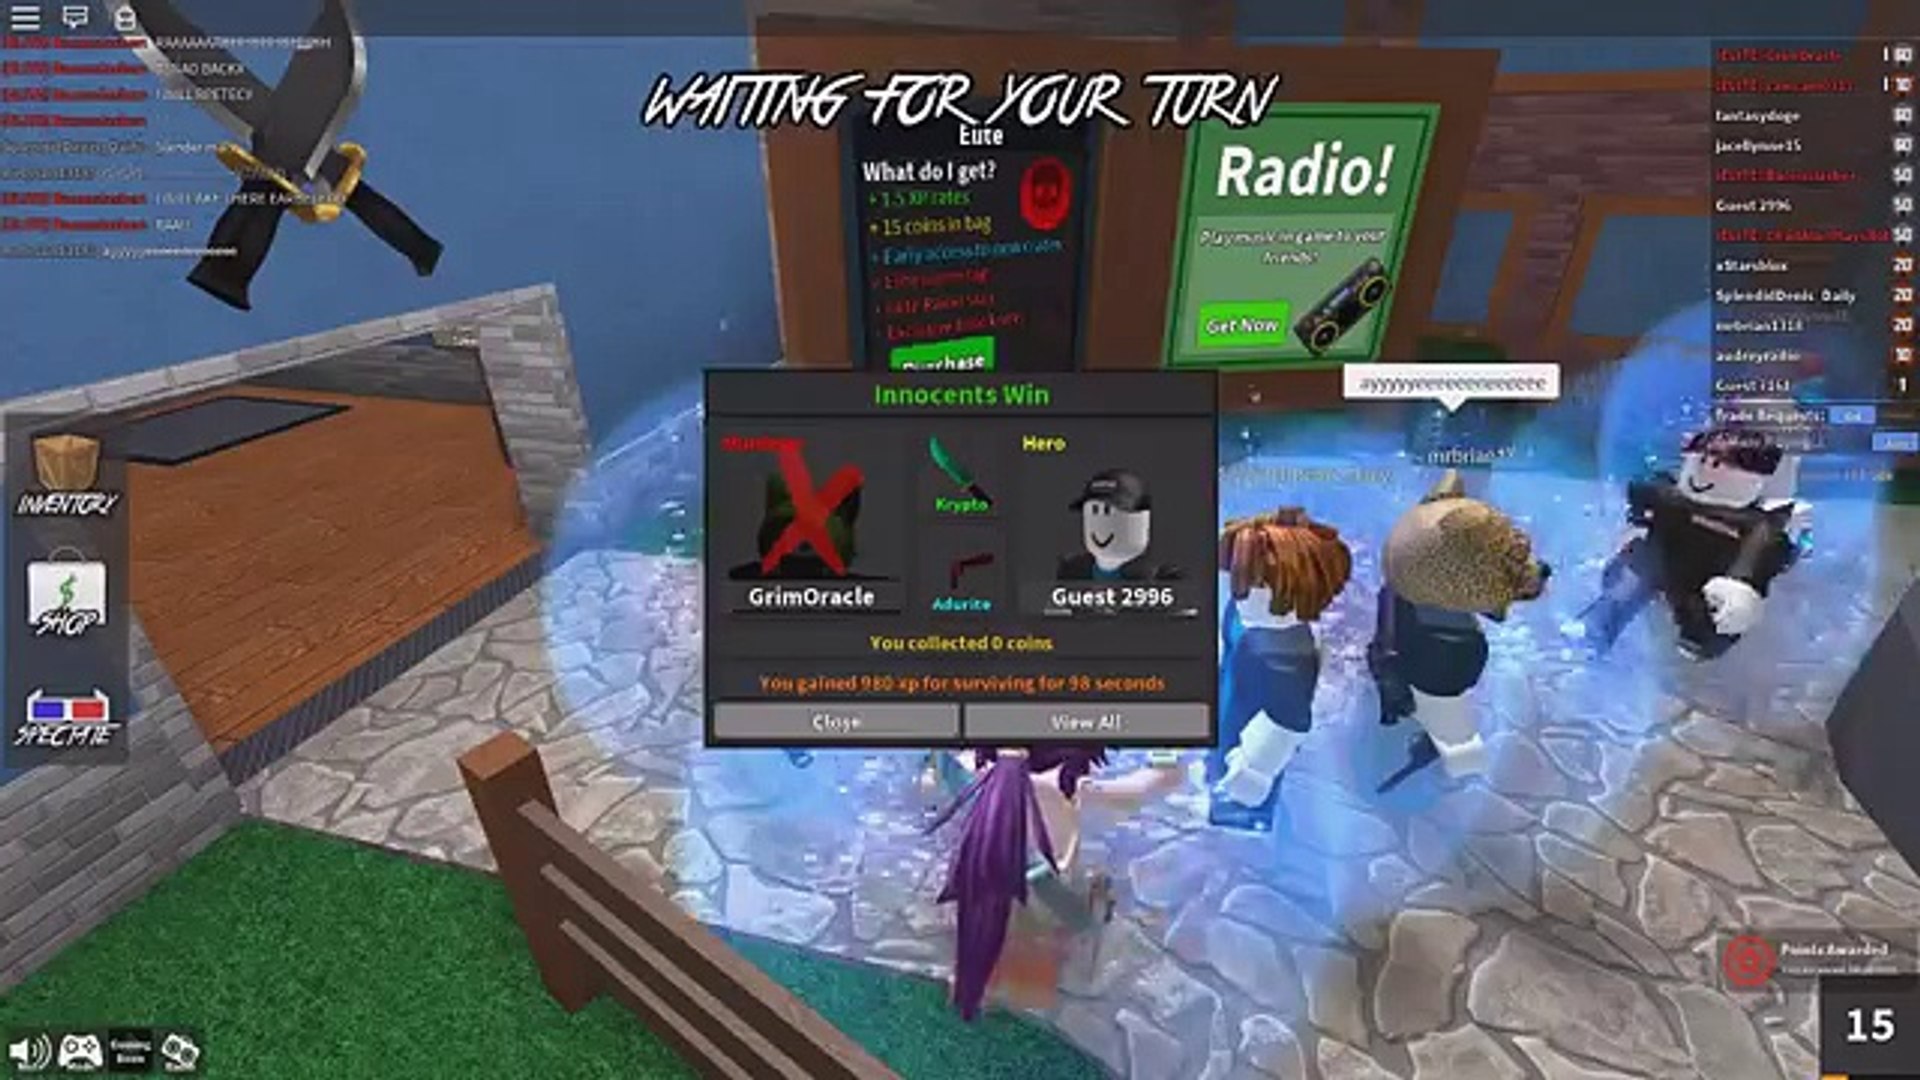 Roblox Lets Play Murder Mystery 2 Radiojh Games Gamer Chad Slg 2020 - roblox mm2 hack coins